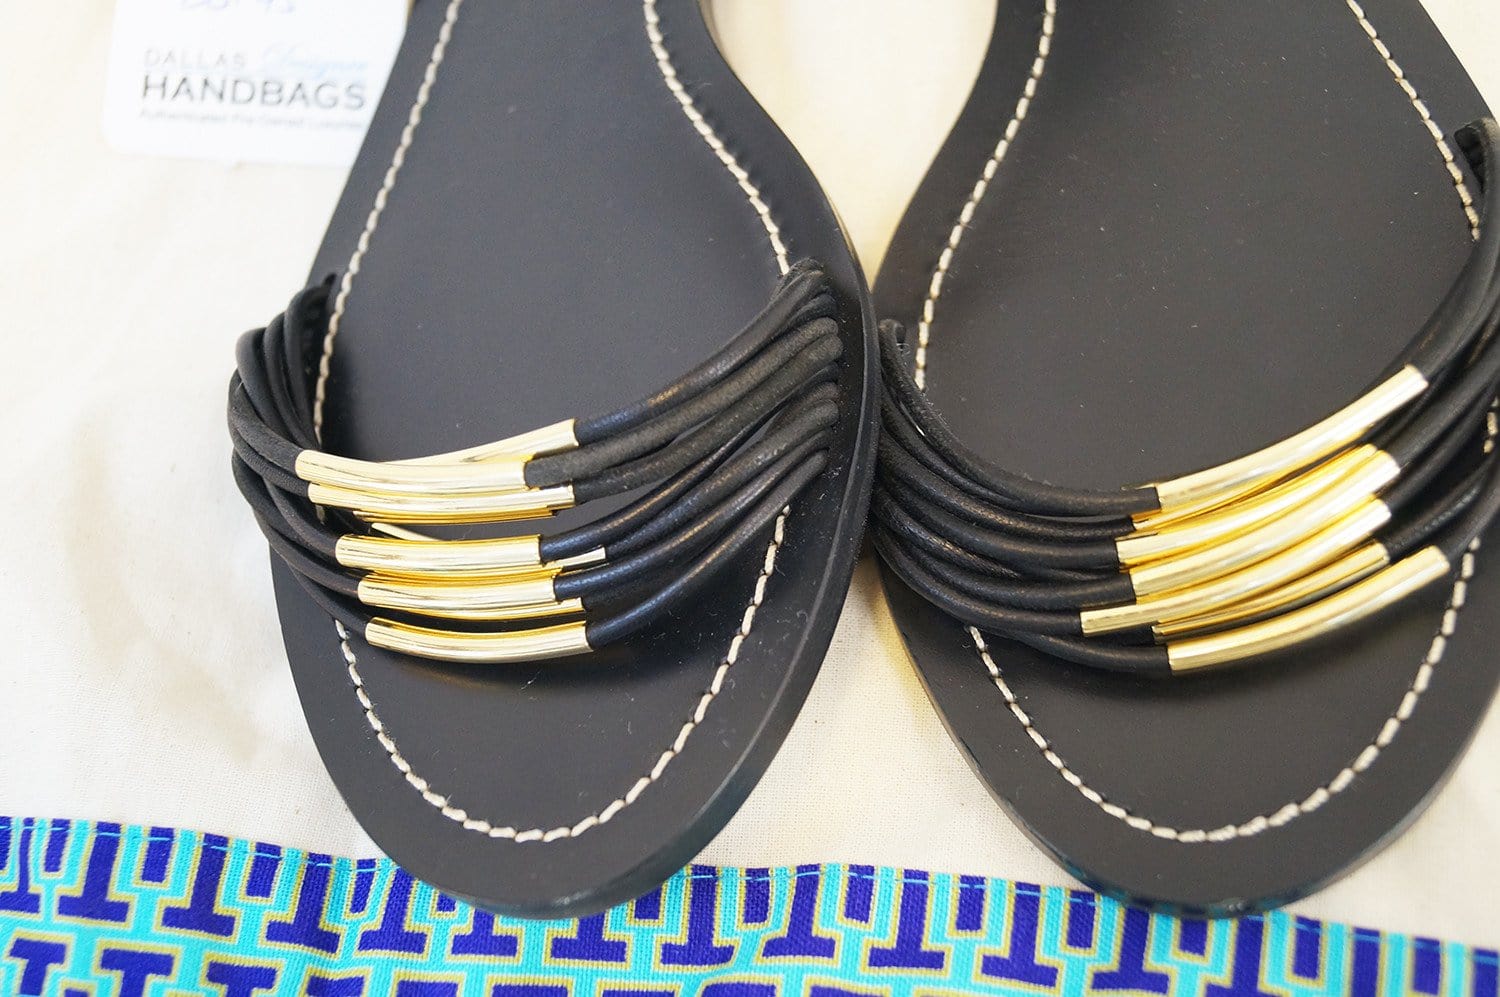 Tory Burch Has So Many Stunning Sandals and Flats on Major Sale